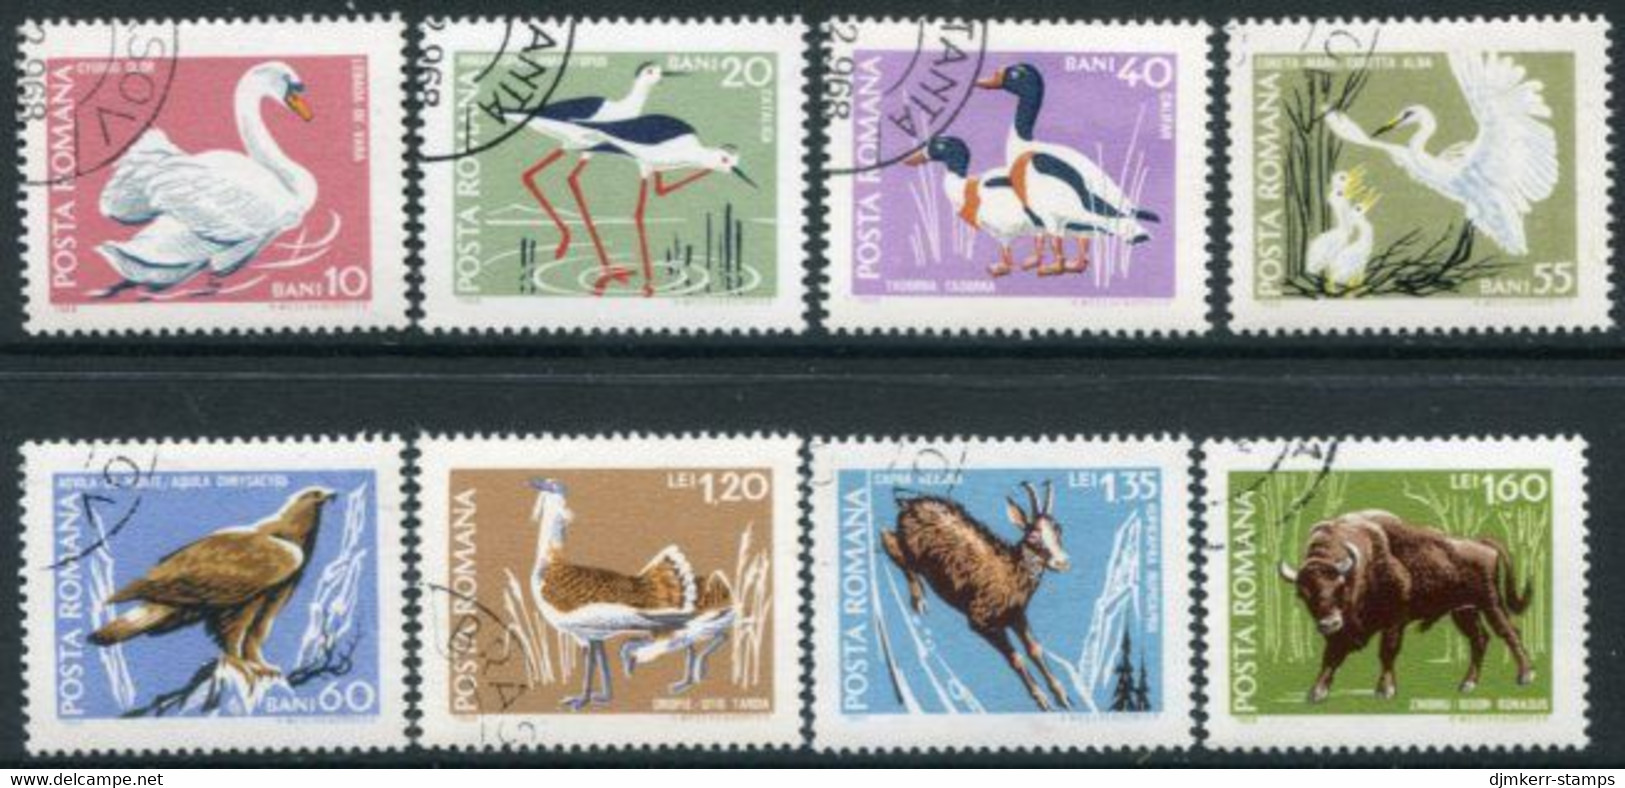 ROMANIA 1968 Protected Fauna  Used  Michel 2724-31 - Used Stamps